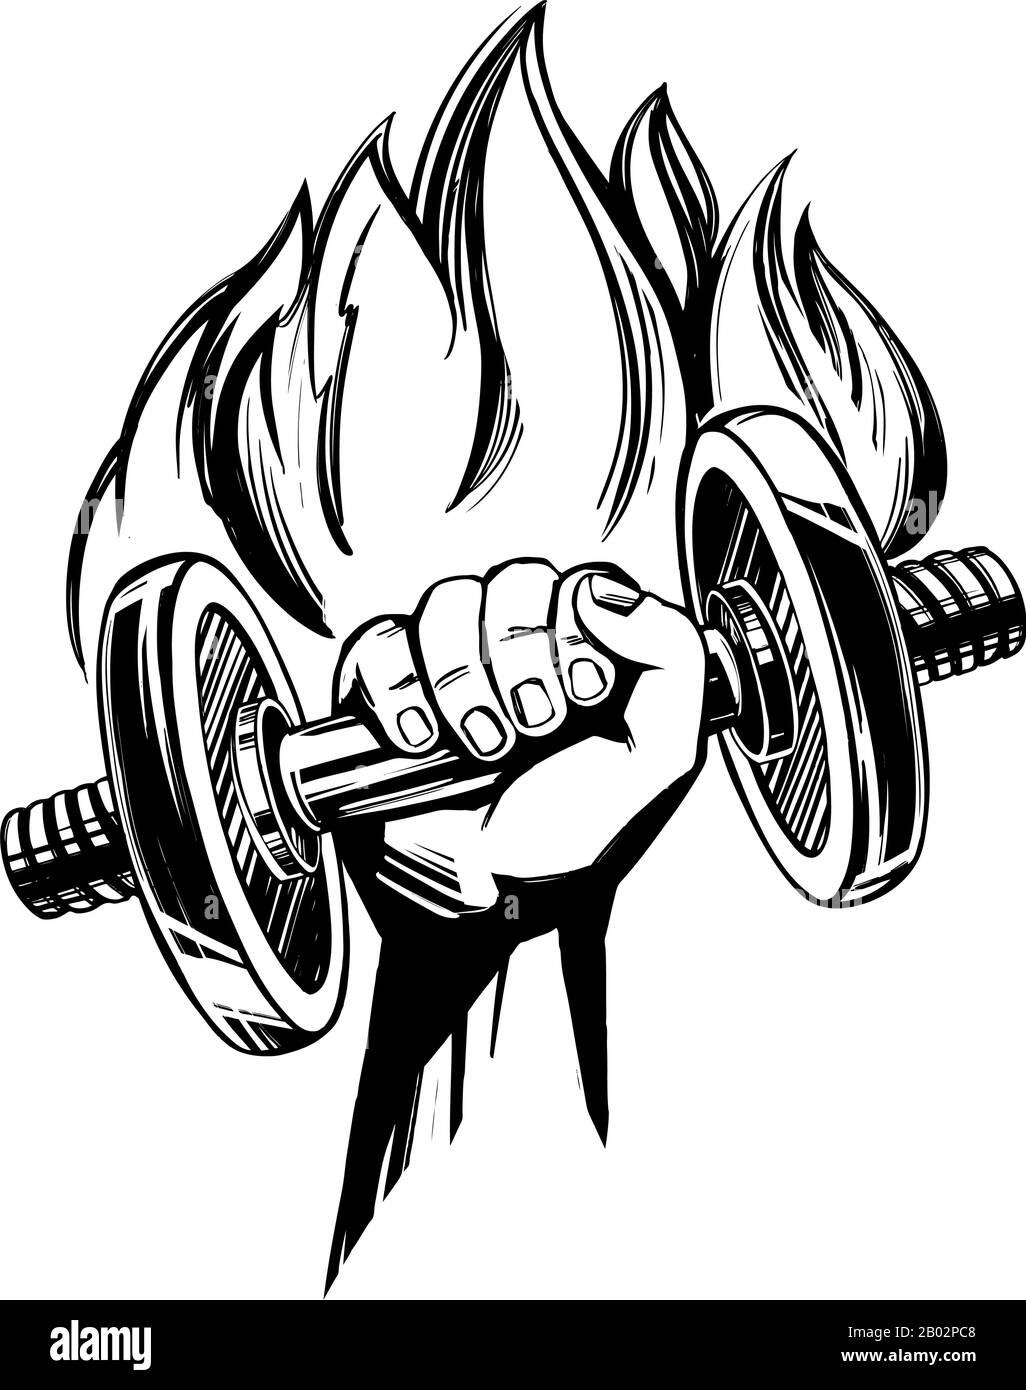 arm, strong hand holding a dumbbell with the fire emblem, icon cartoon hand drawn vector illustration sketch. Stock Vector